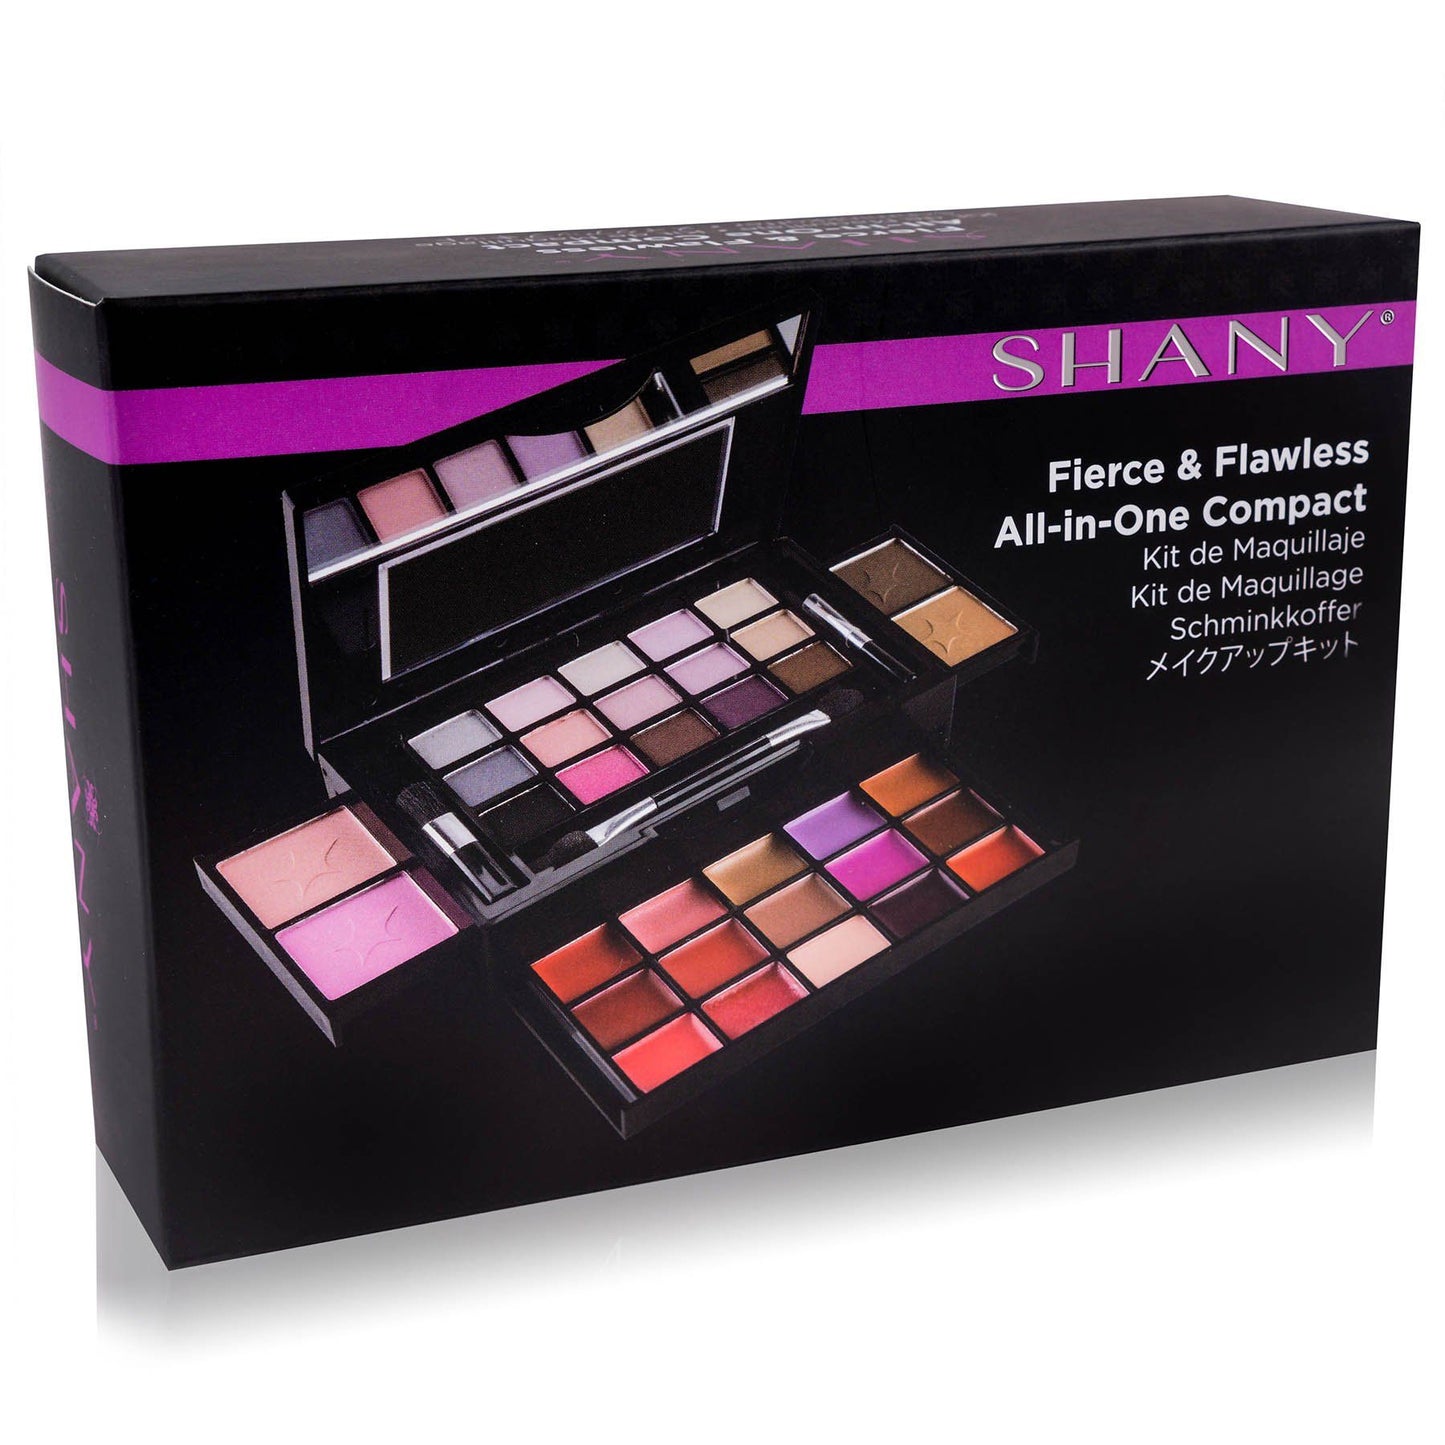 Fierce & Flawless All-in-One Compact with 34 Colors